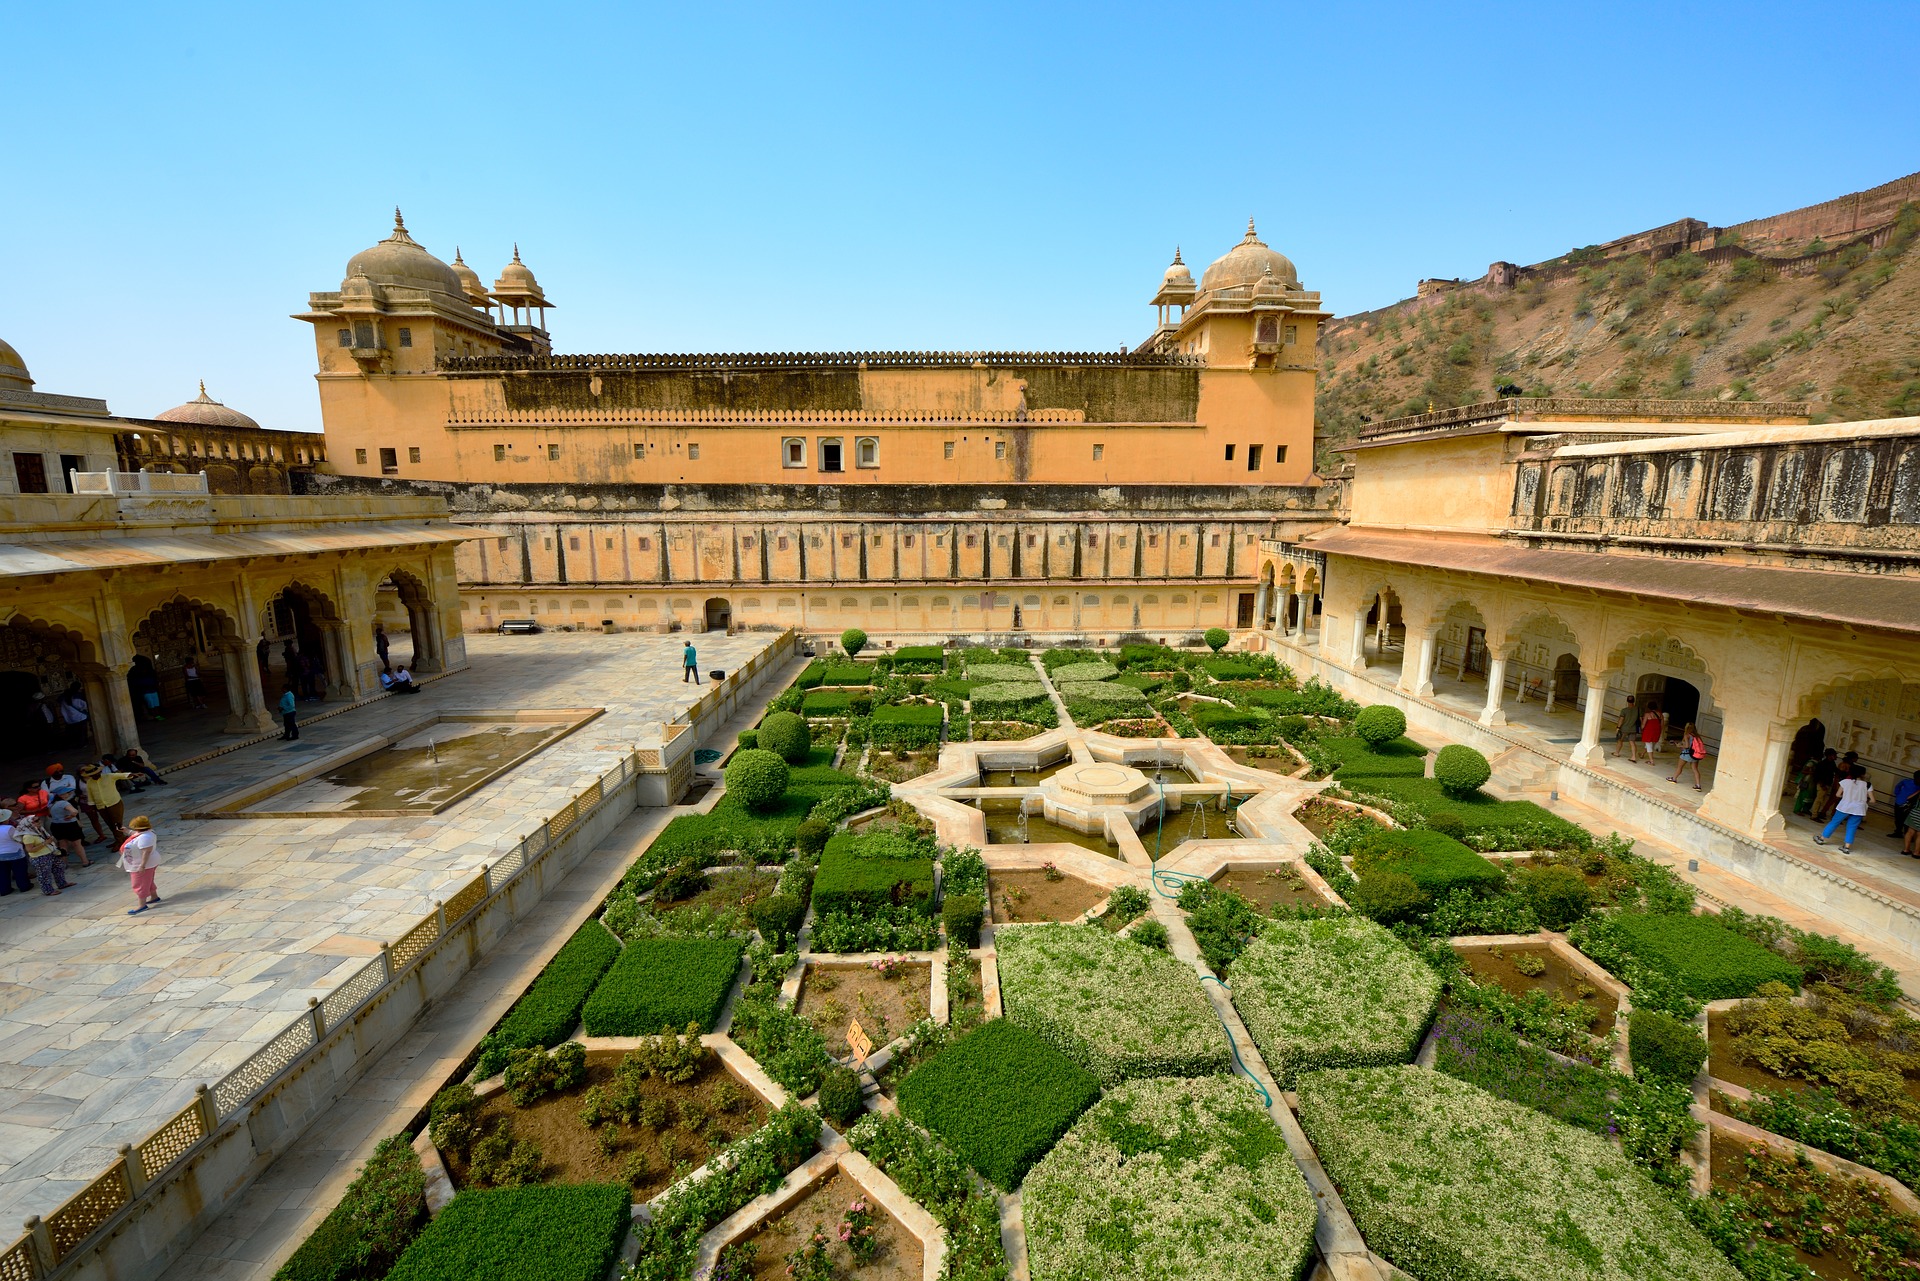 Amber Fort: The Wonder of India